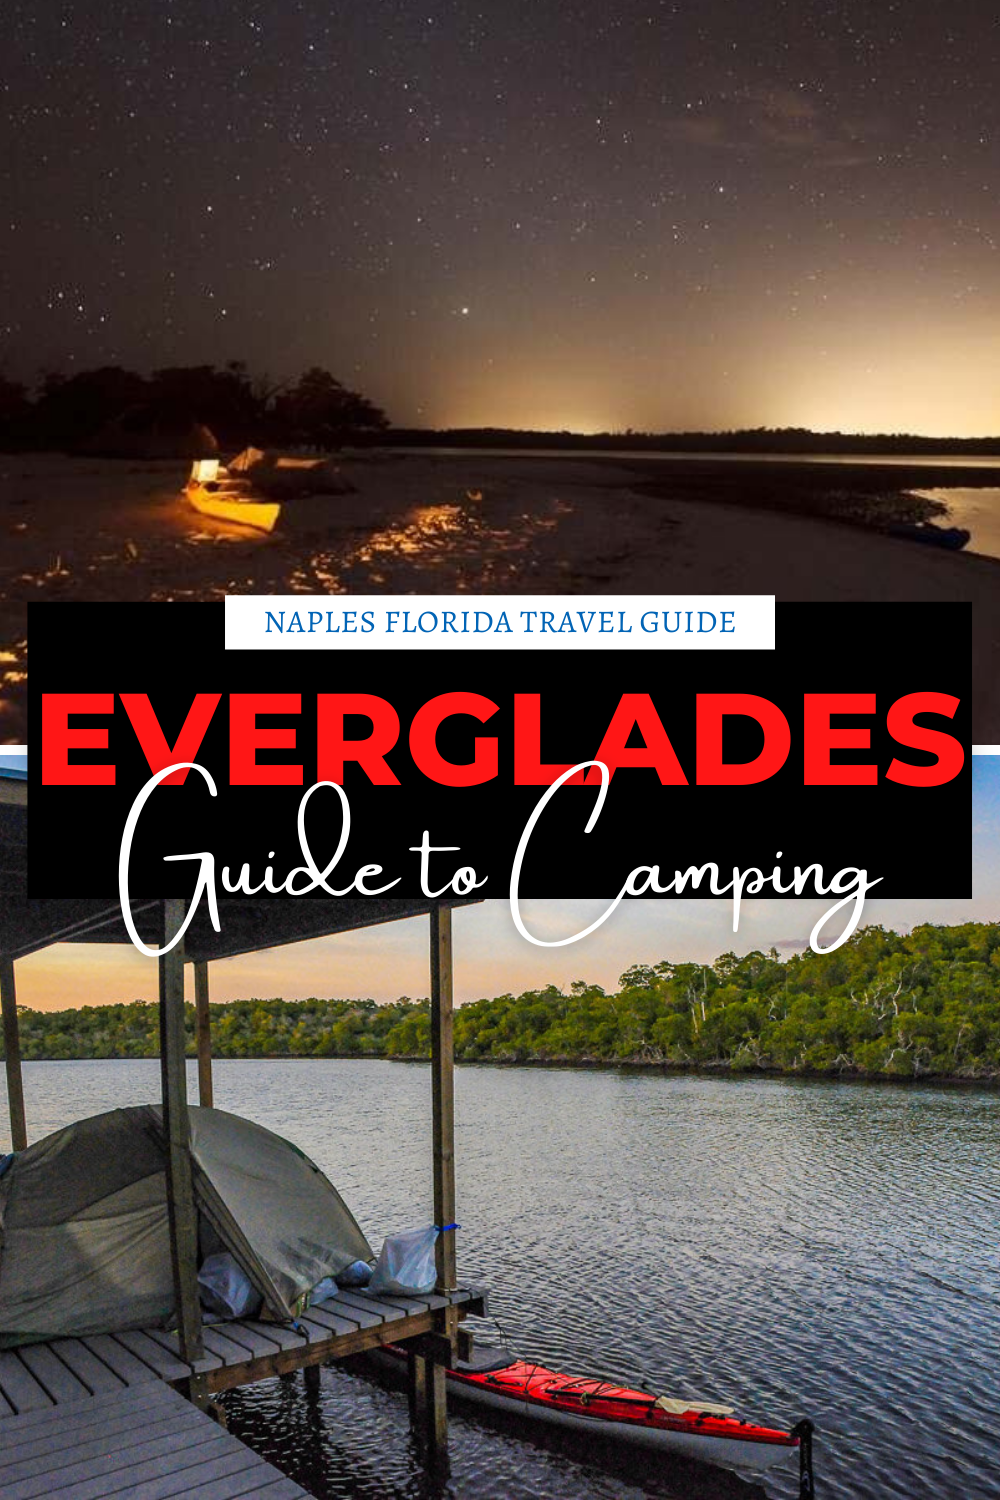 Want to go camping in Everglades National Park? This Everglades camping guide will help you plan your adventure. #camping #Everglades